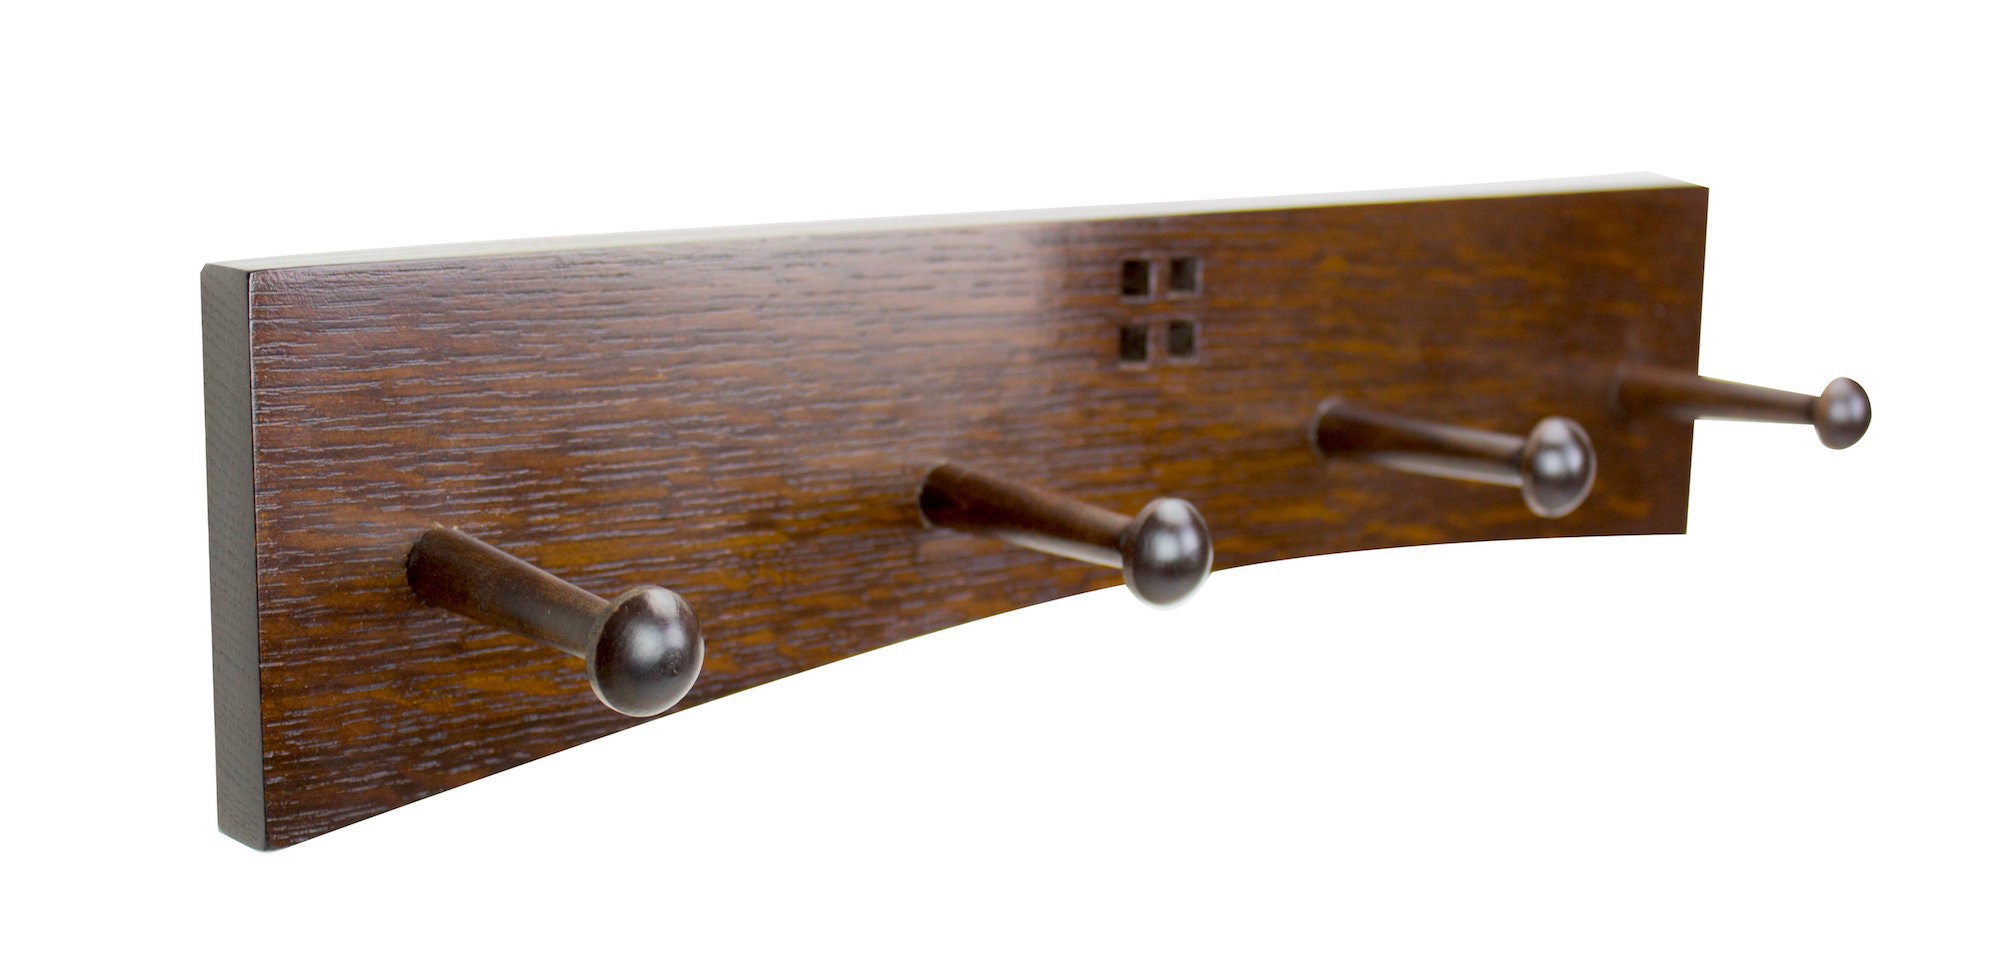 Buy Custom Made Arts And Crafts / Mission Cast Iron Hook Coat Rack, made to  order from Vollman Woodworking